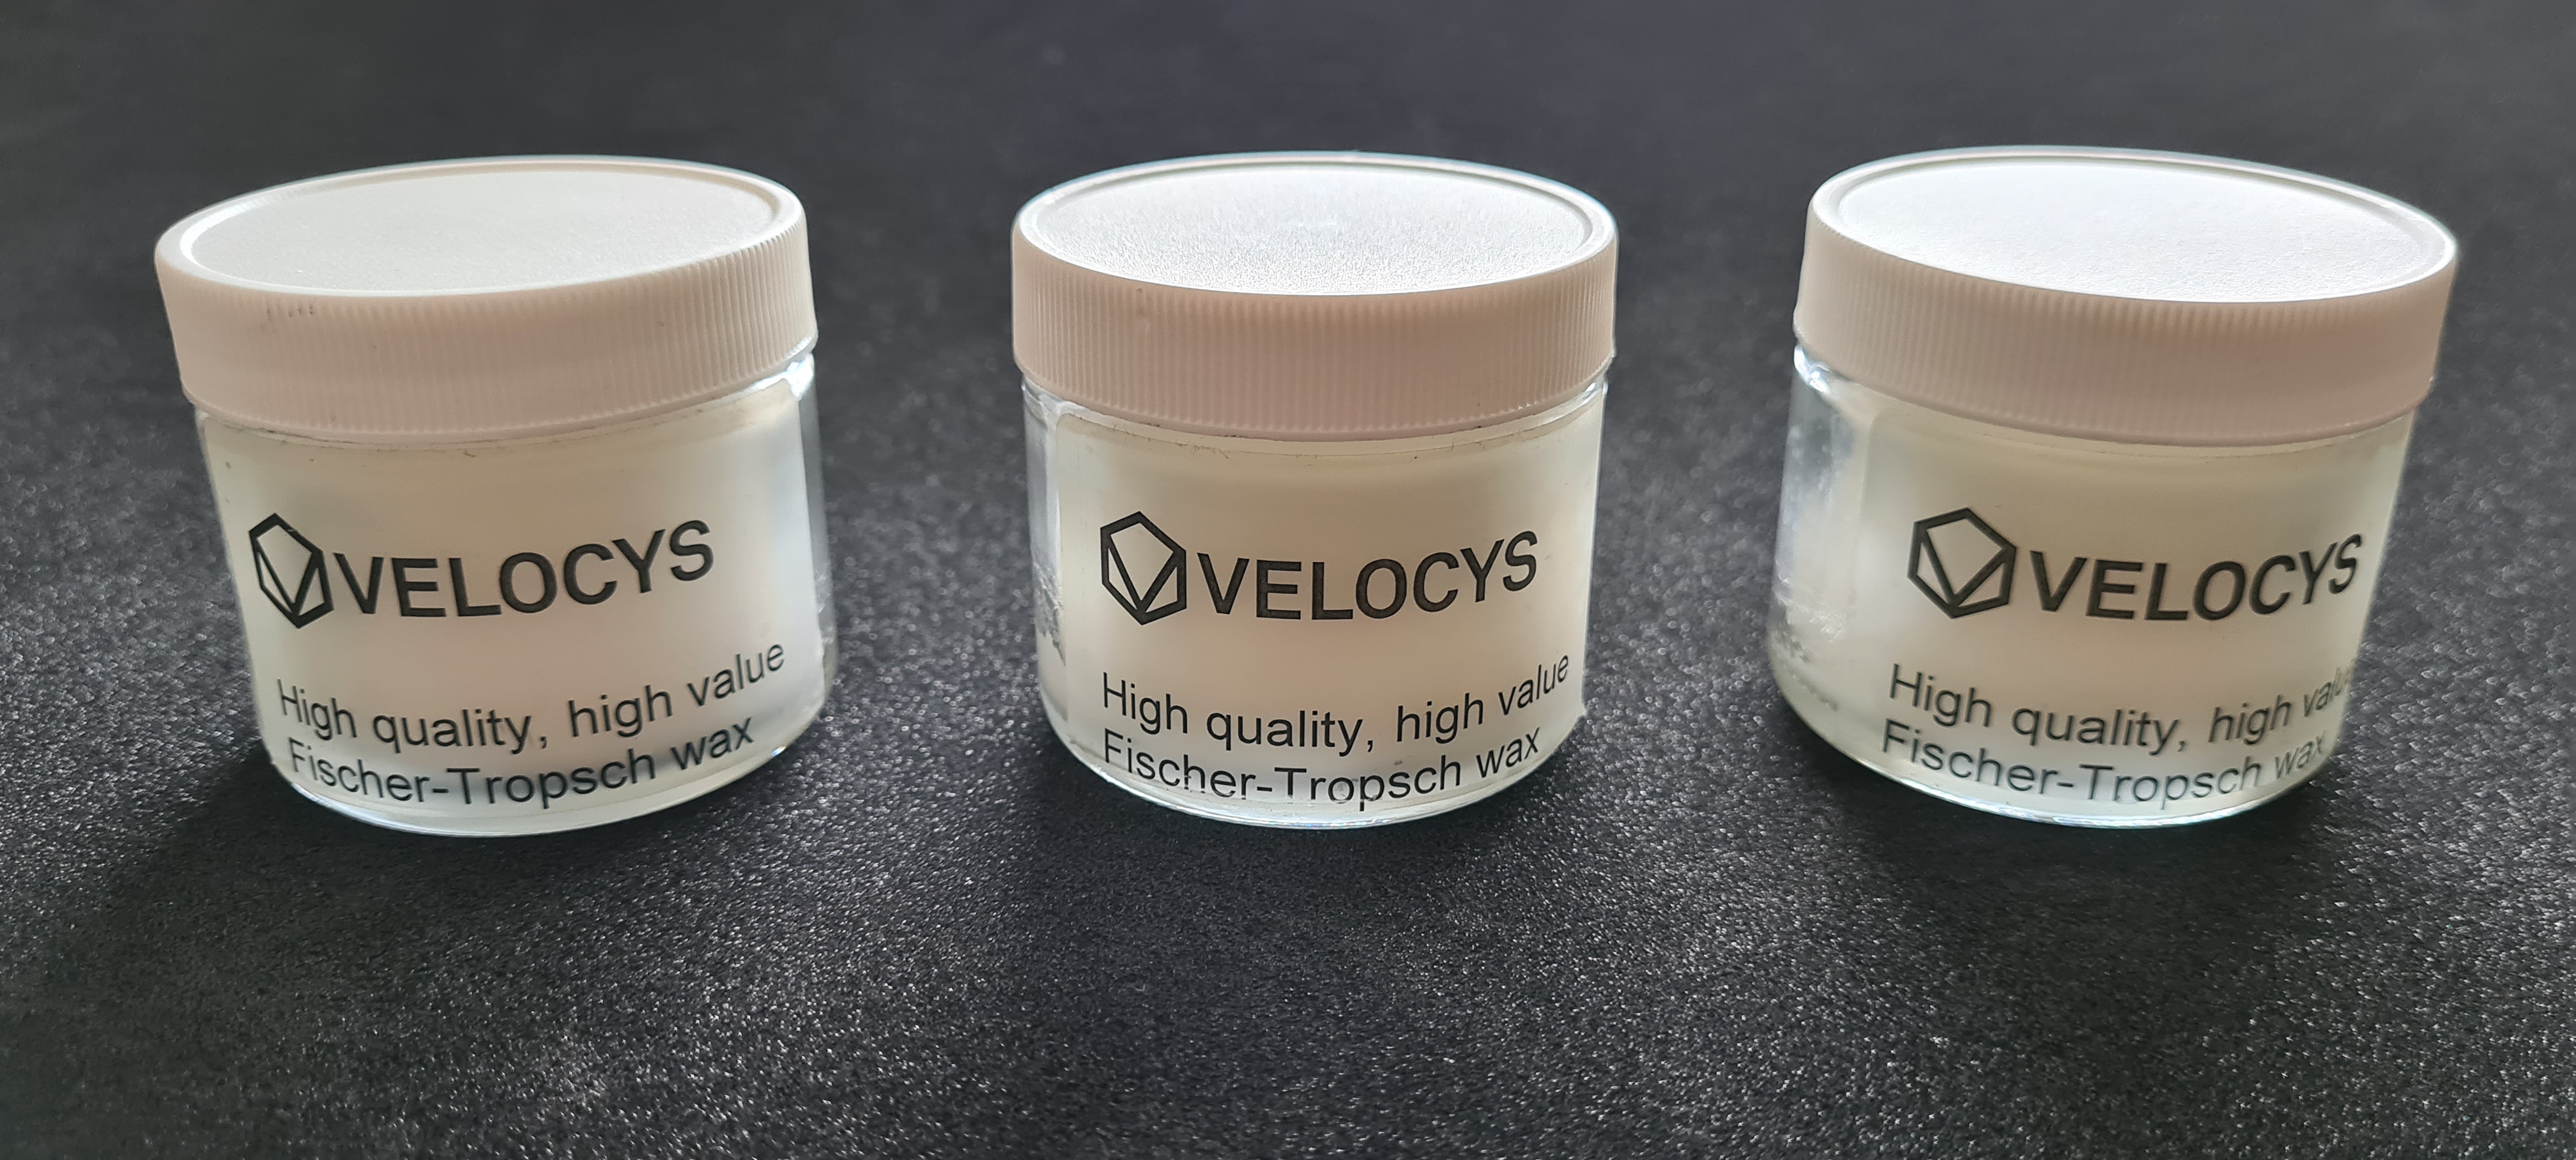 Parafin wax, EF.2020.4.1-3. These are three jars of paraffin wax, produced by Velocys using the Fischer-Tropsch process. This turns domestic waste into paraffin wax which can then be turned into jet fuel. It burns more cleanly than normal kerosene, in particular avoiding the sooty particulates that are normally produced. This is therefore a cleaner burning fuel produced from waste diverted from landfill. It is hoped this can go into full-scale production.